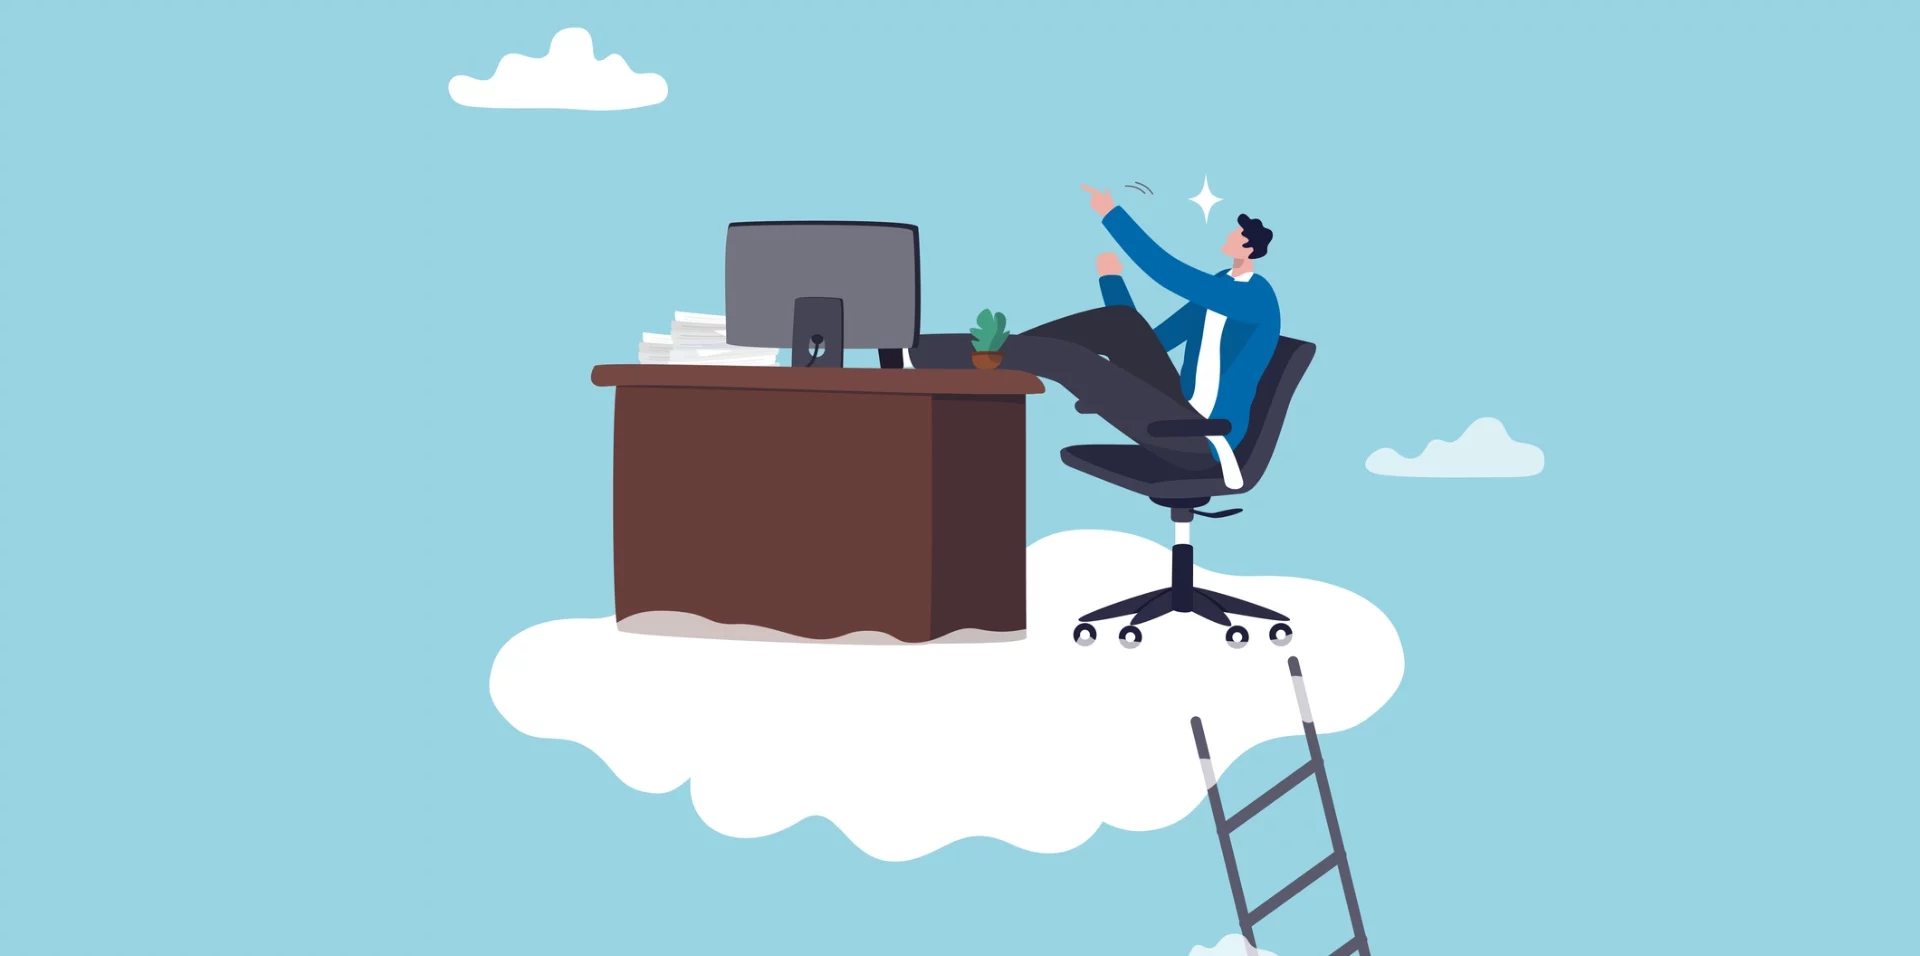 Animated image of a man working at his desk on top of a cloud in the sky